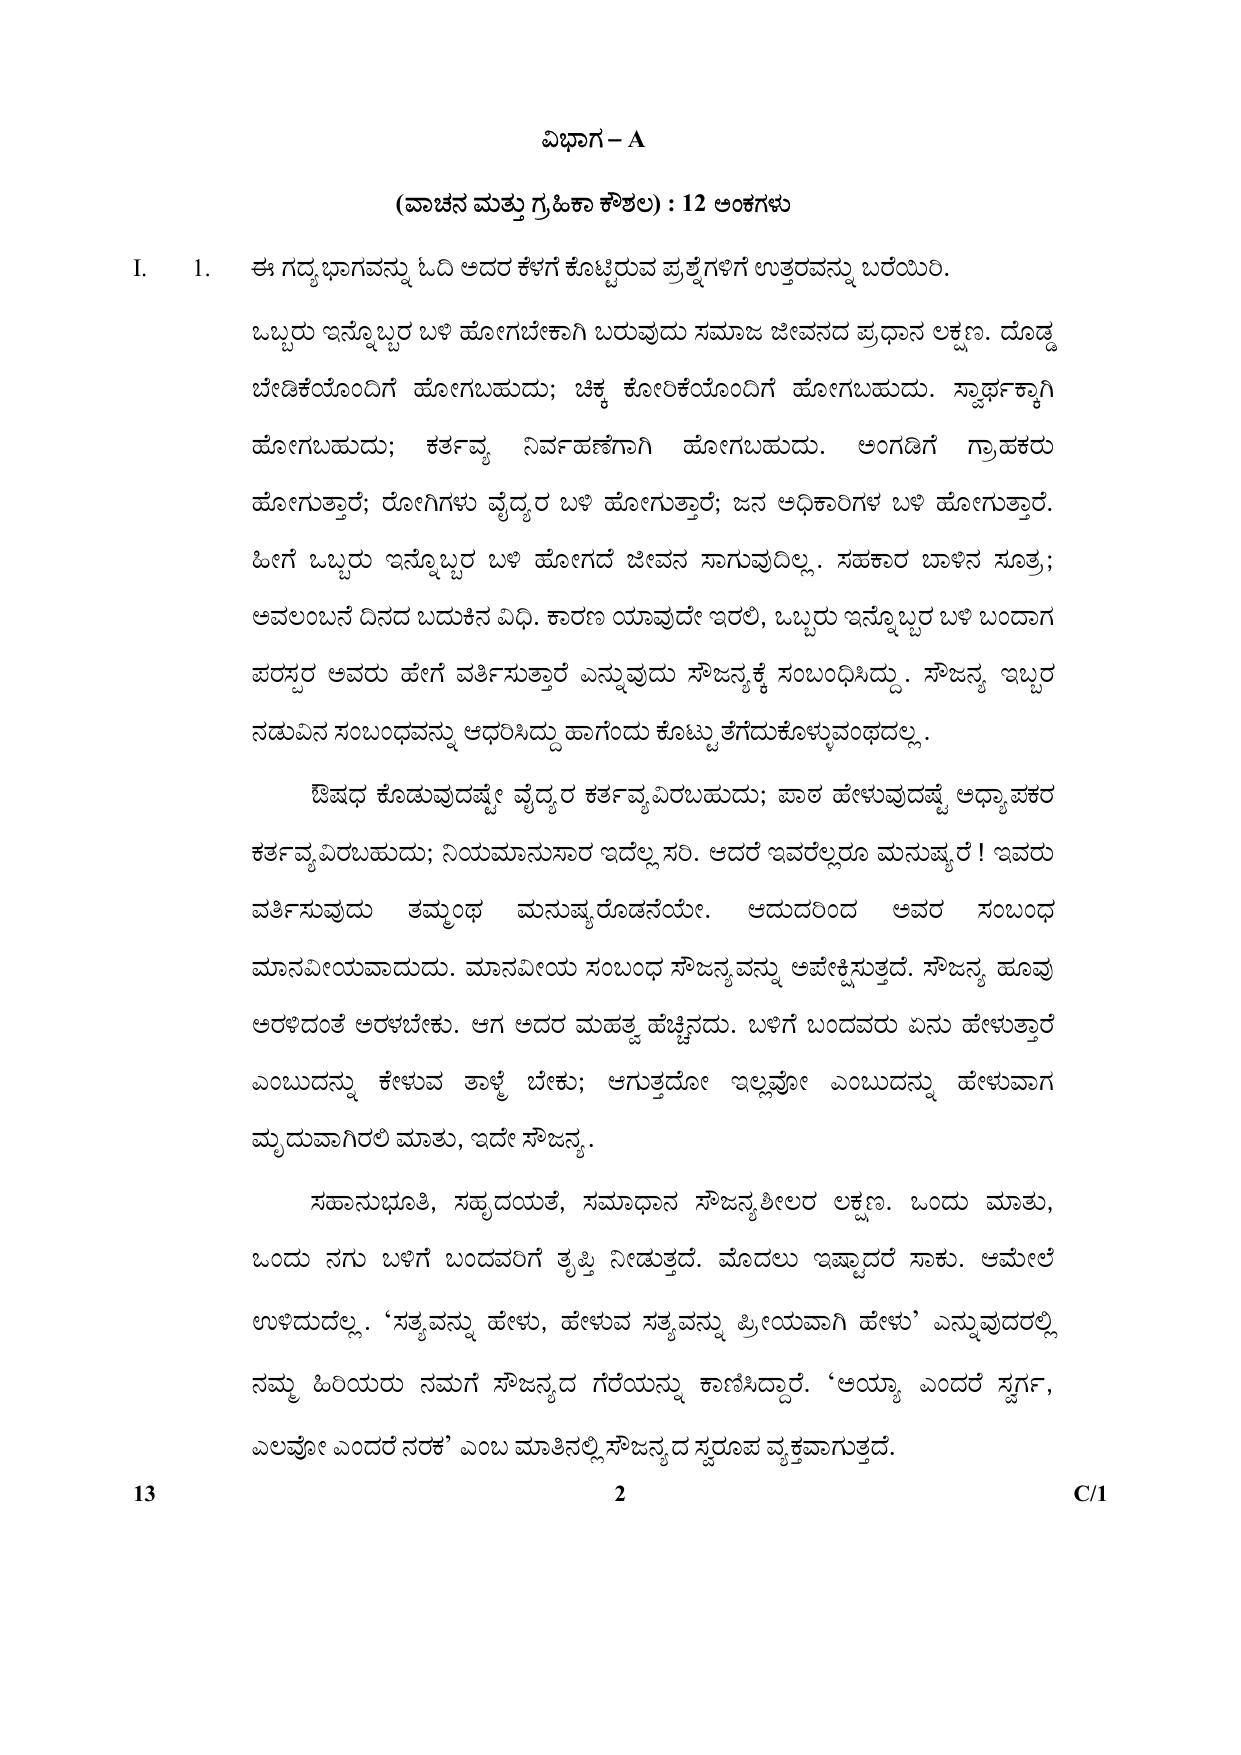 CBSE Class 10 13 (Kannada) 2018 Compartment Question Paper - Page 2